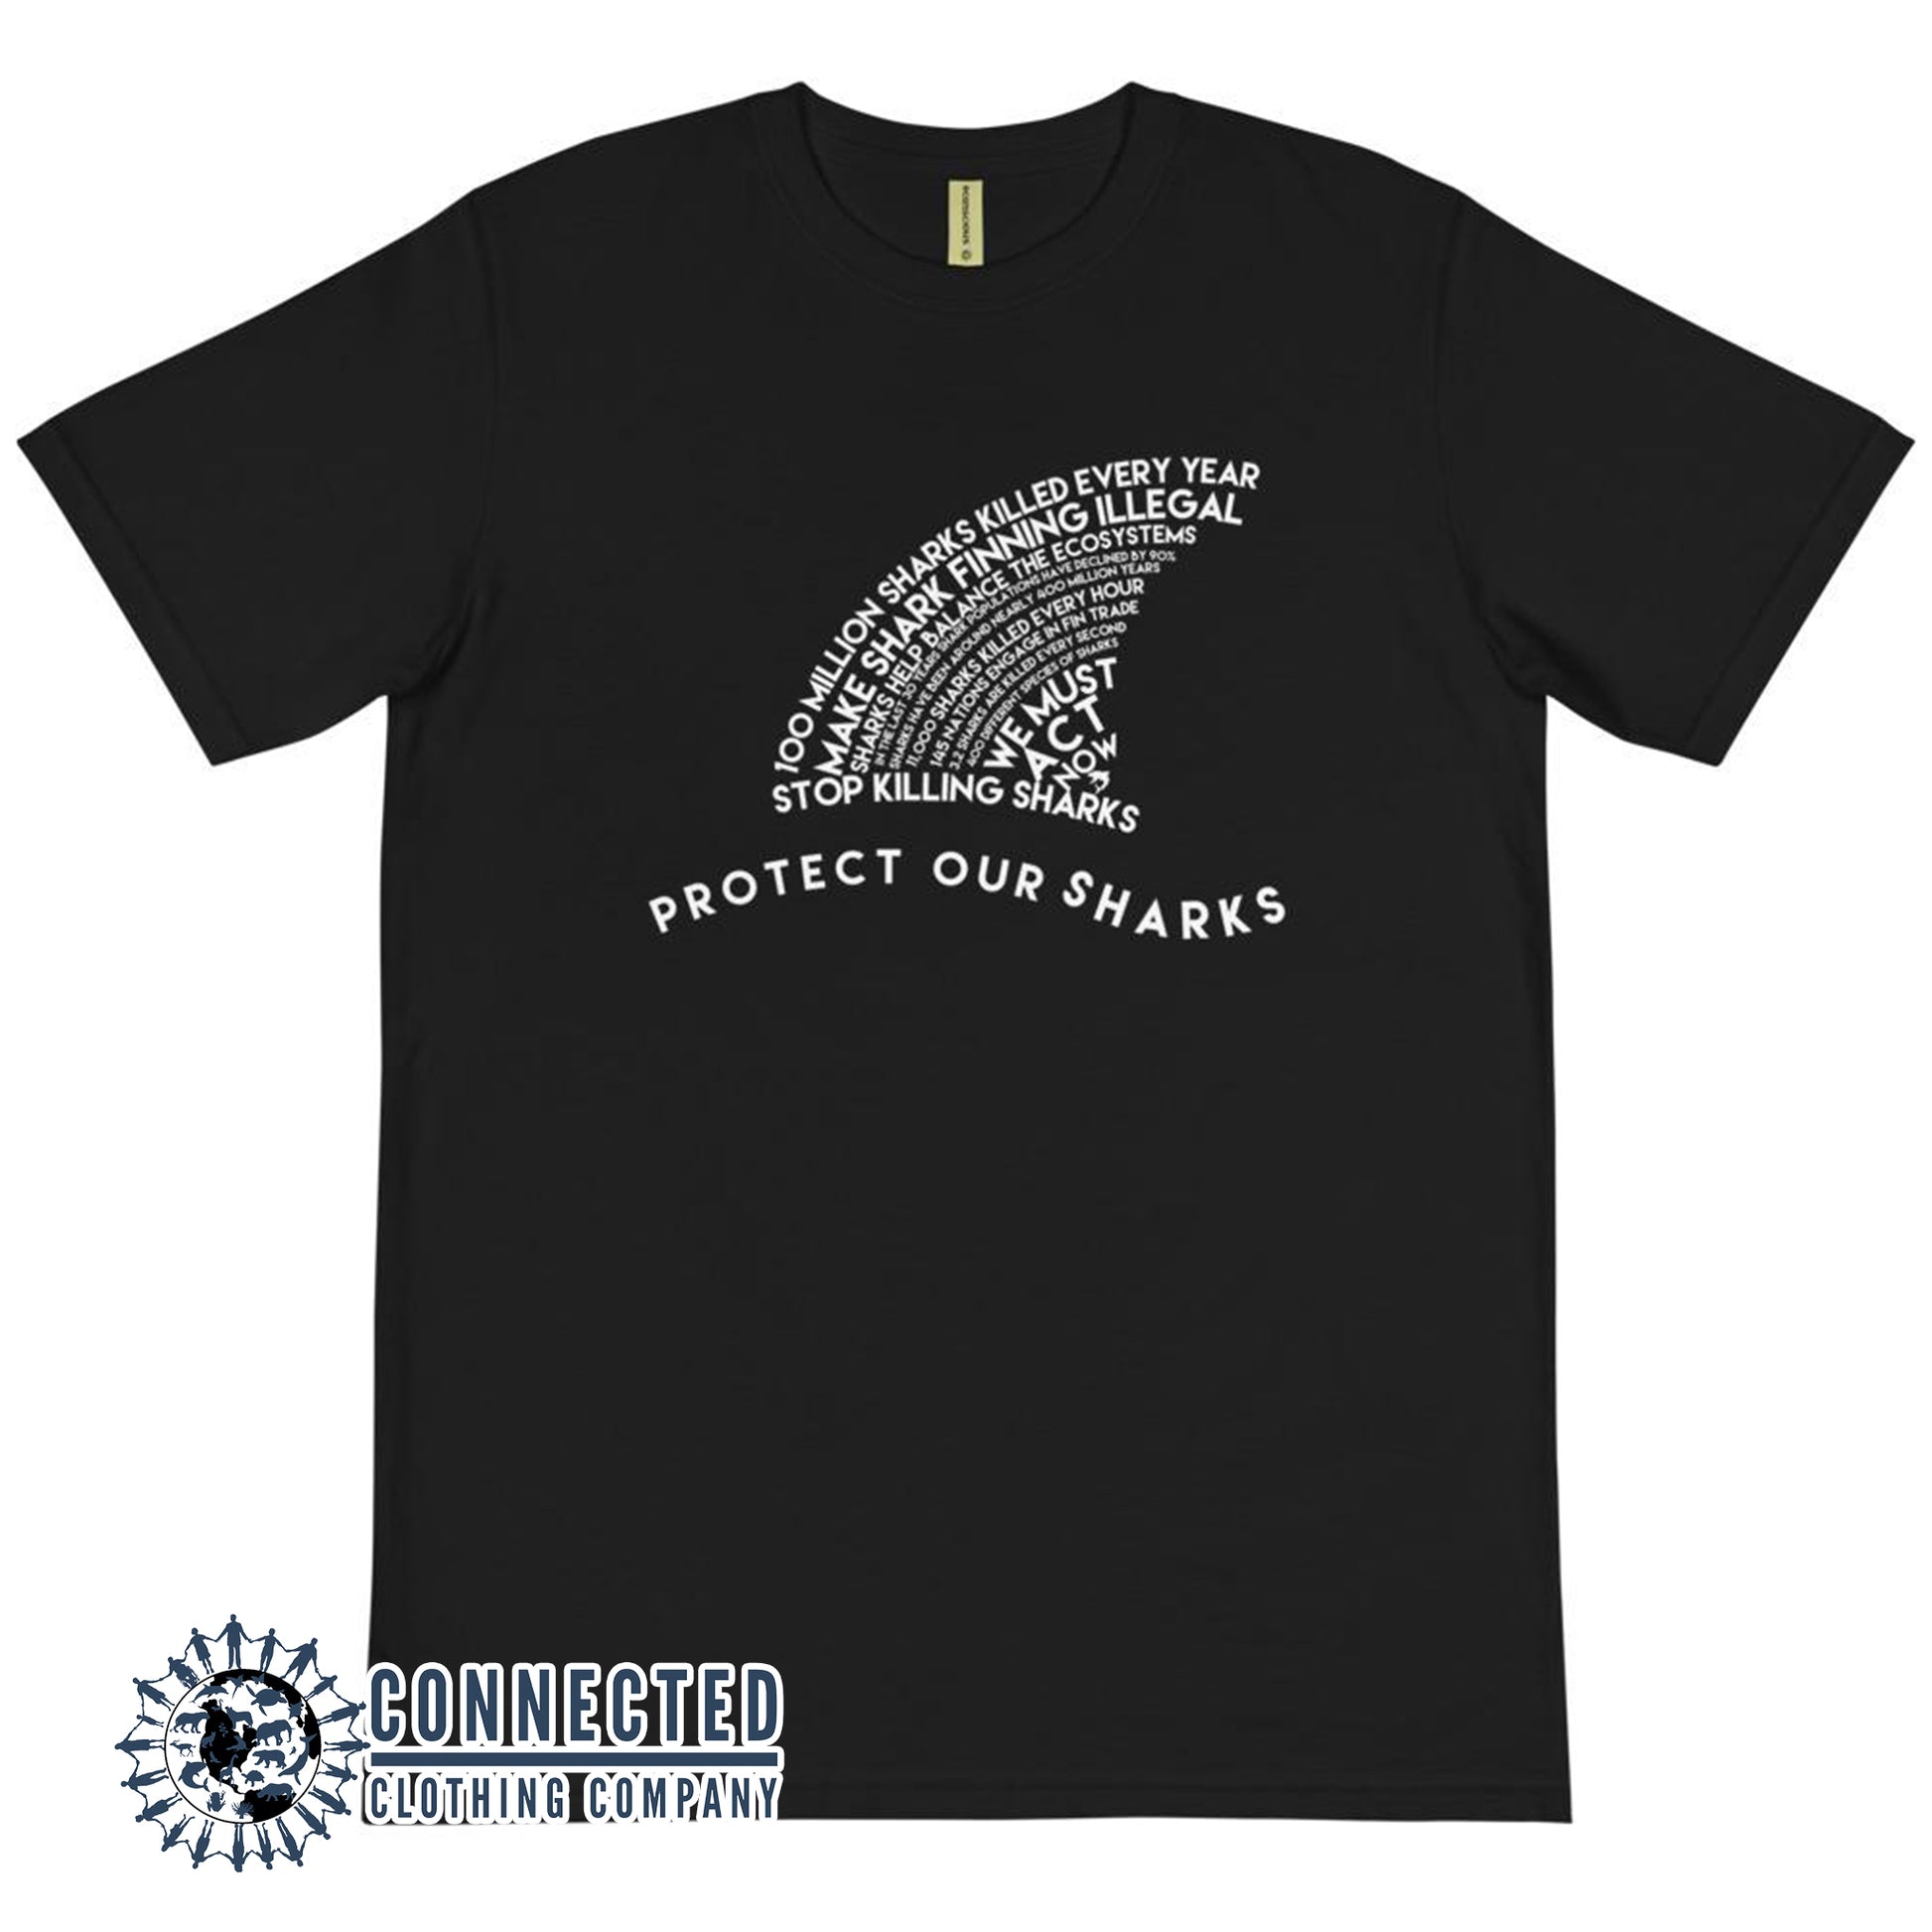 Black Organic Protect Our Sharks Short-Sleeve Tee - Connected Clothing Company - 10% of profits donated to shark conservation